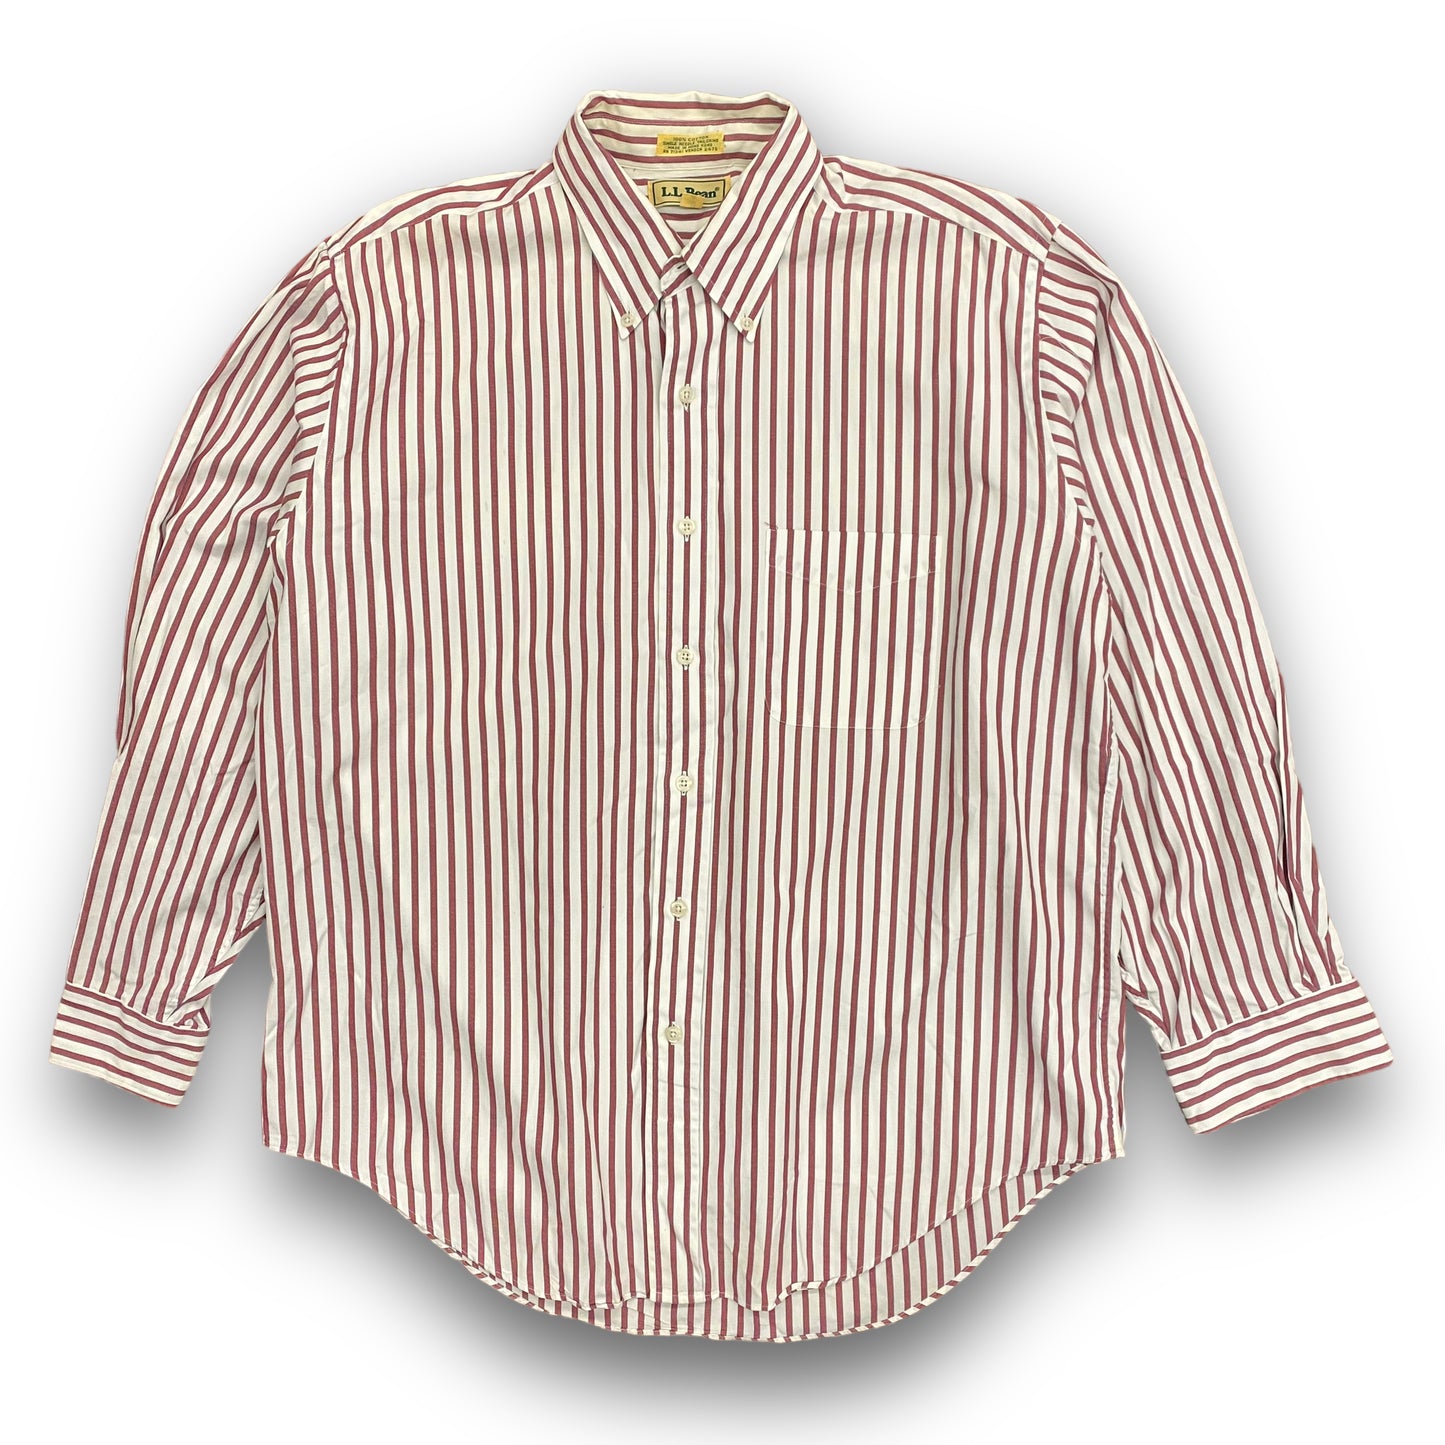 1980s LL Bean Red Striped Button Down Shirt - Size Large